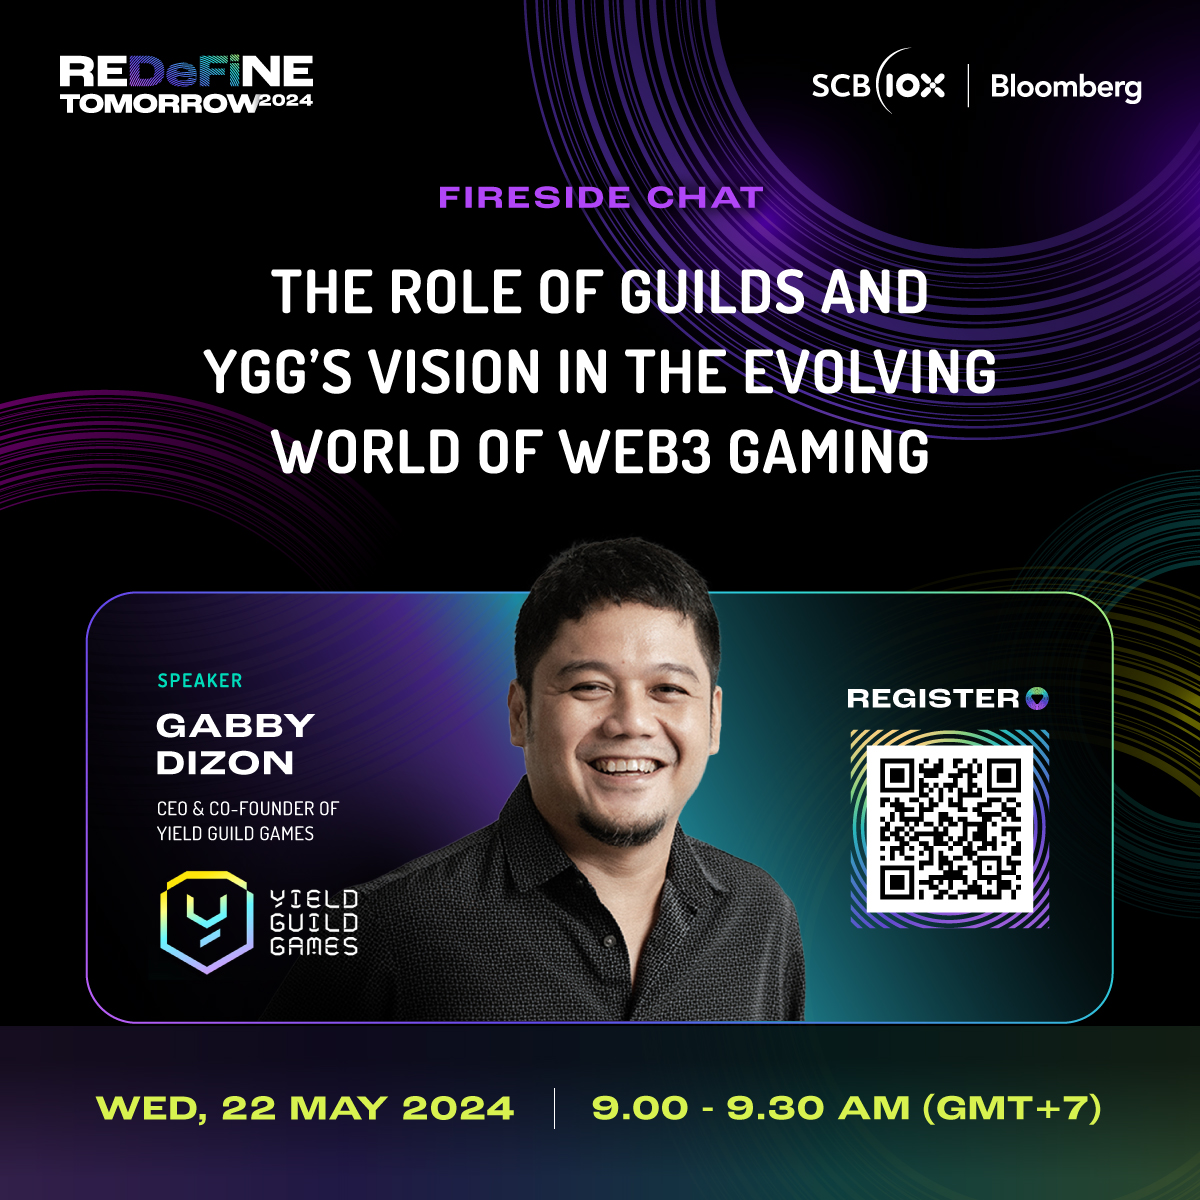 Meet the speaker at #REDeFiNETOMORROW2024 / 21-22 May 2024 Fireside Chat: The Role of Guilds and YGG’s Vision in the Evolving World of Web3 Gaming @gabusch of @YieldGuild Free ticket: bloombergevents.com/SCB10x_2024